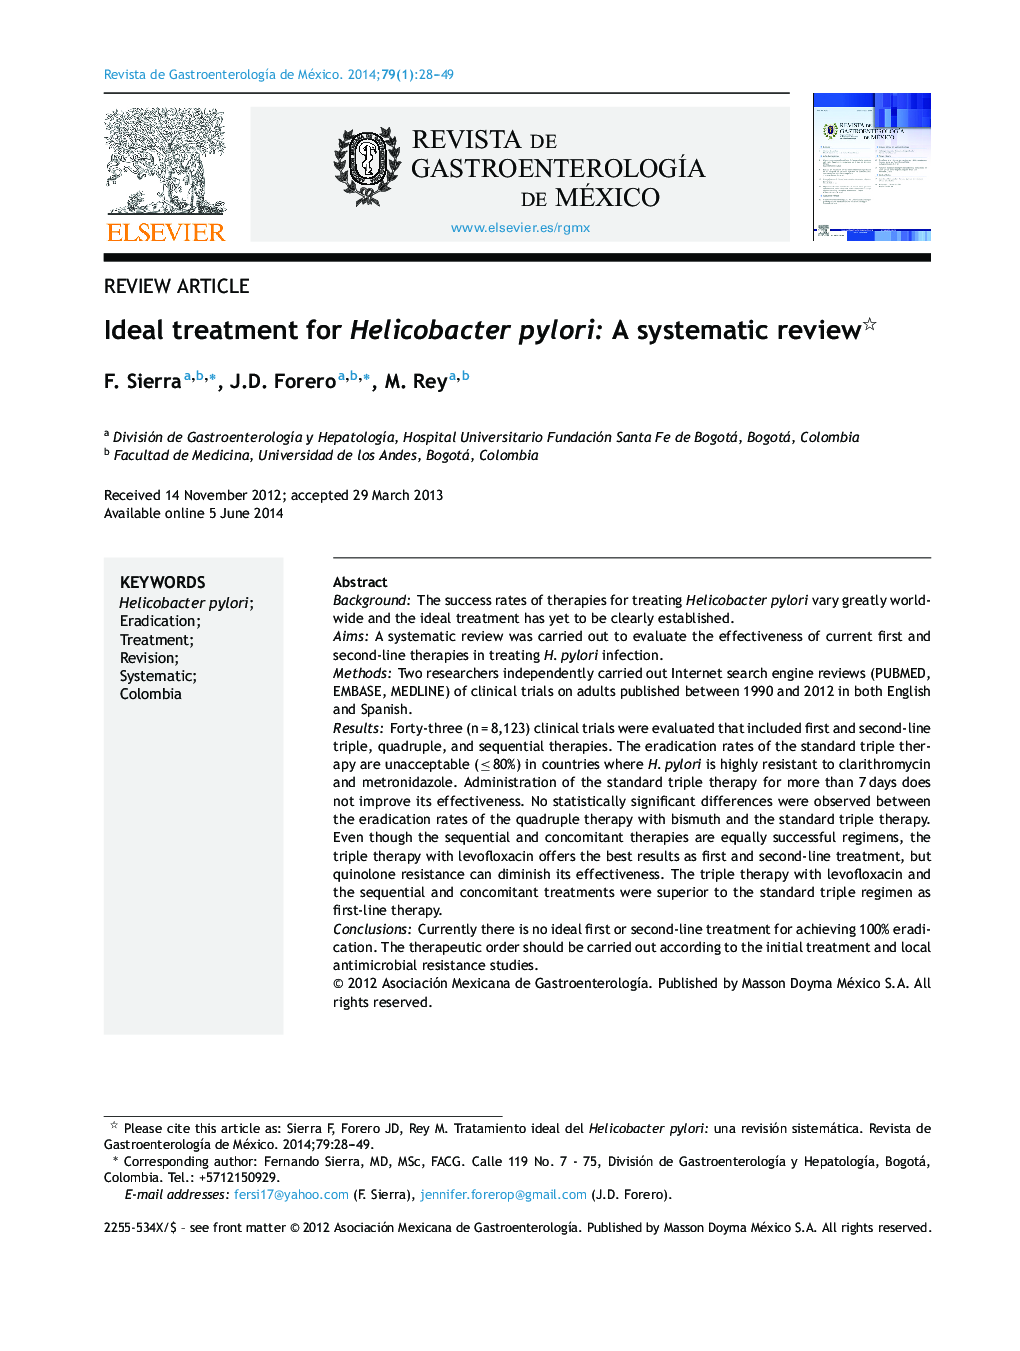 Ideal treatment for Helicobacter pylori: A systematic review 